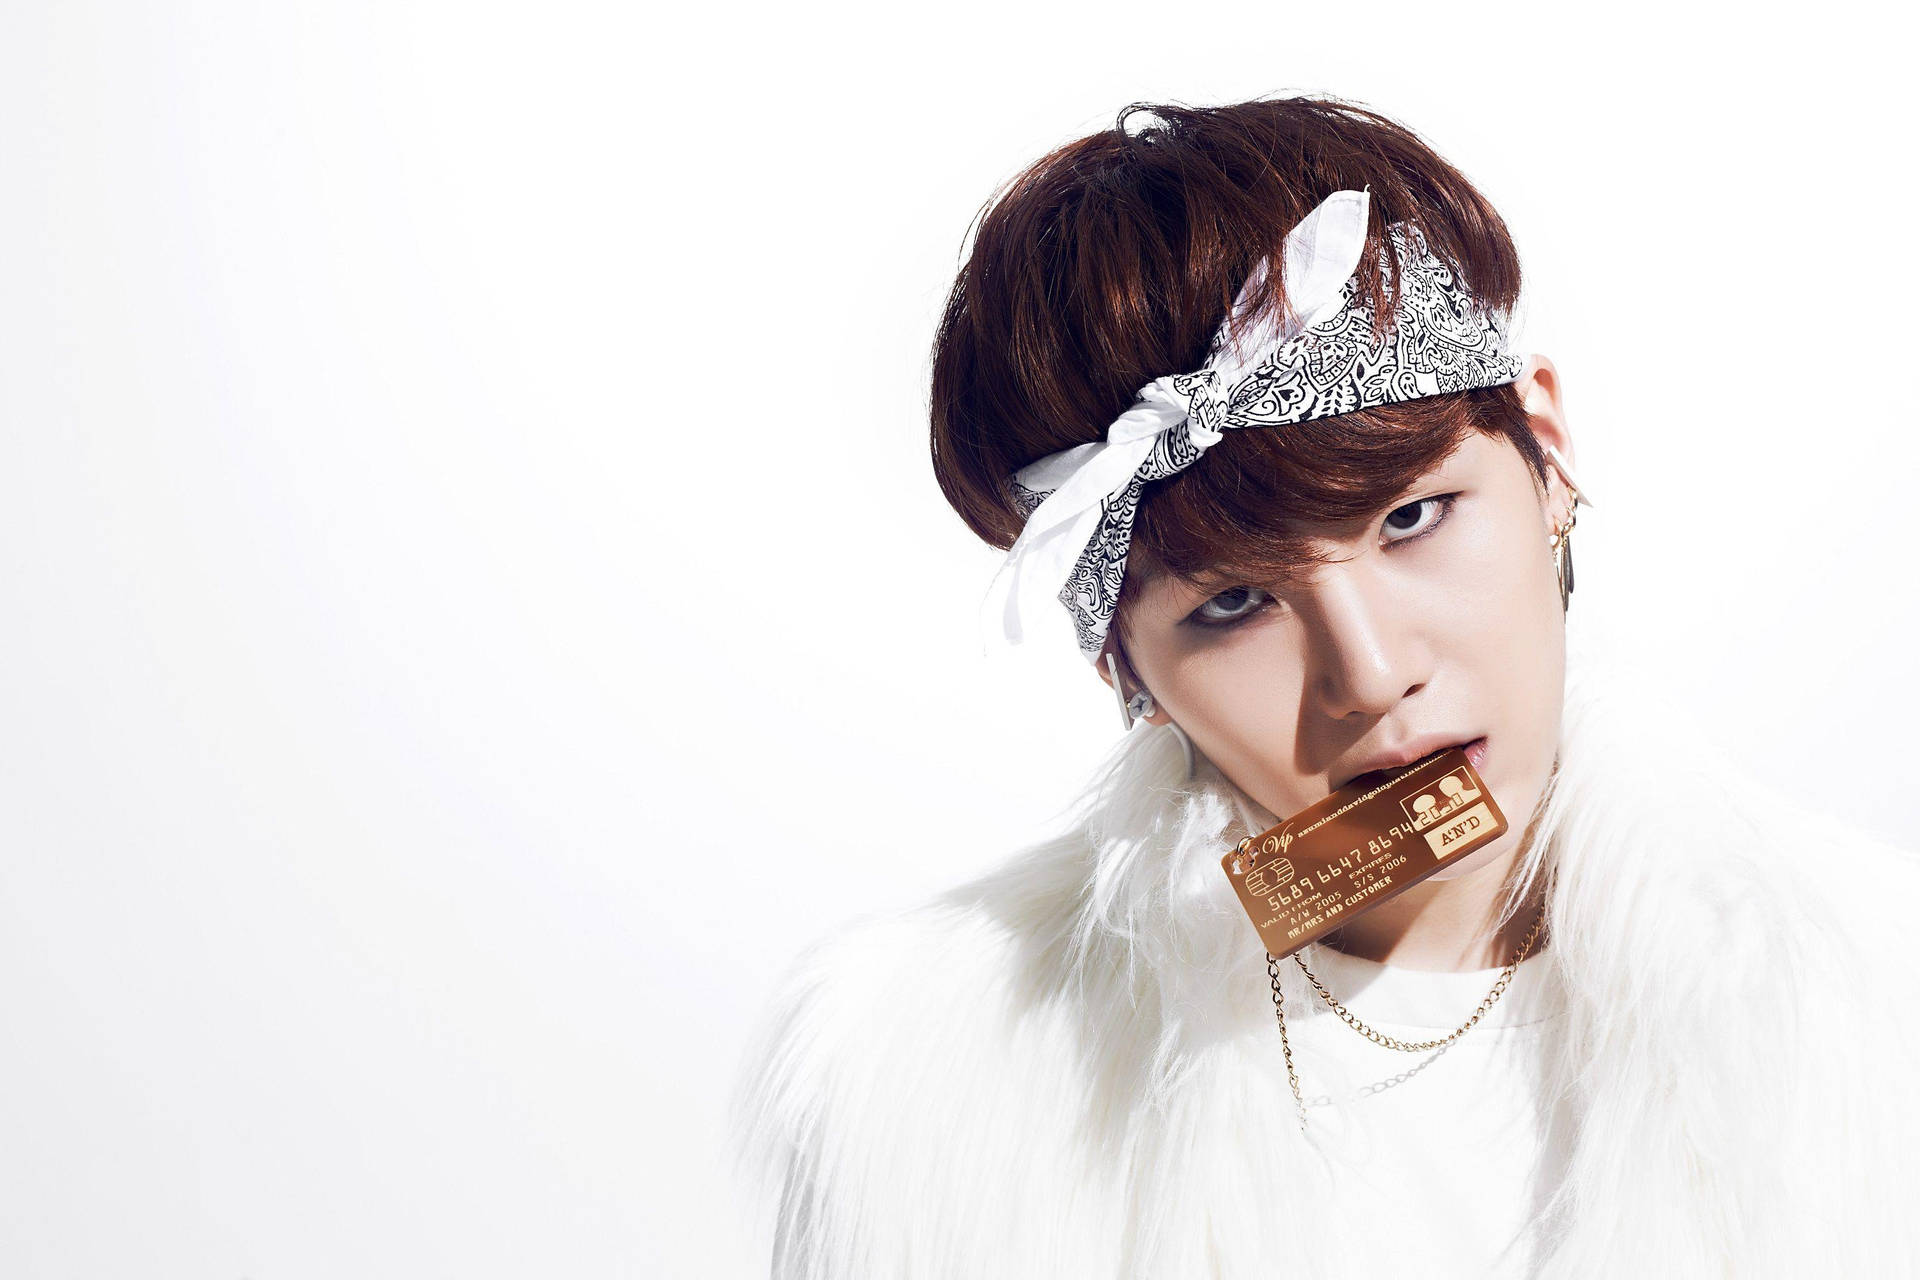 Suga Bts In White Outfit